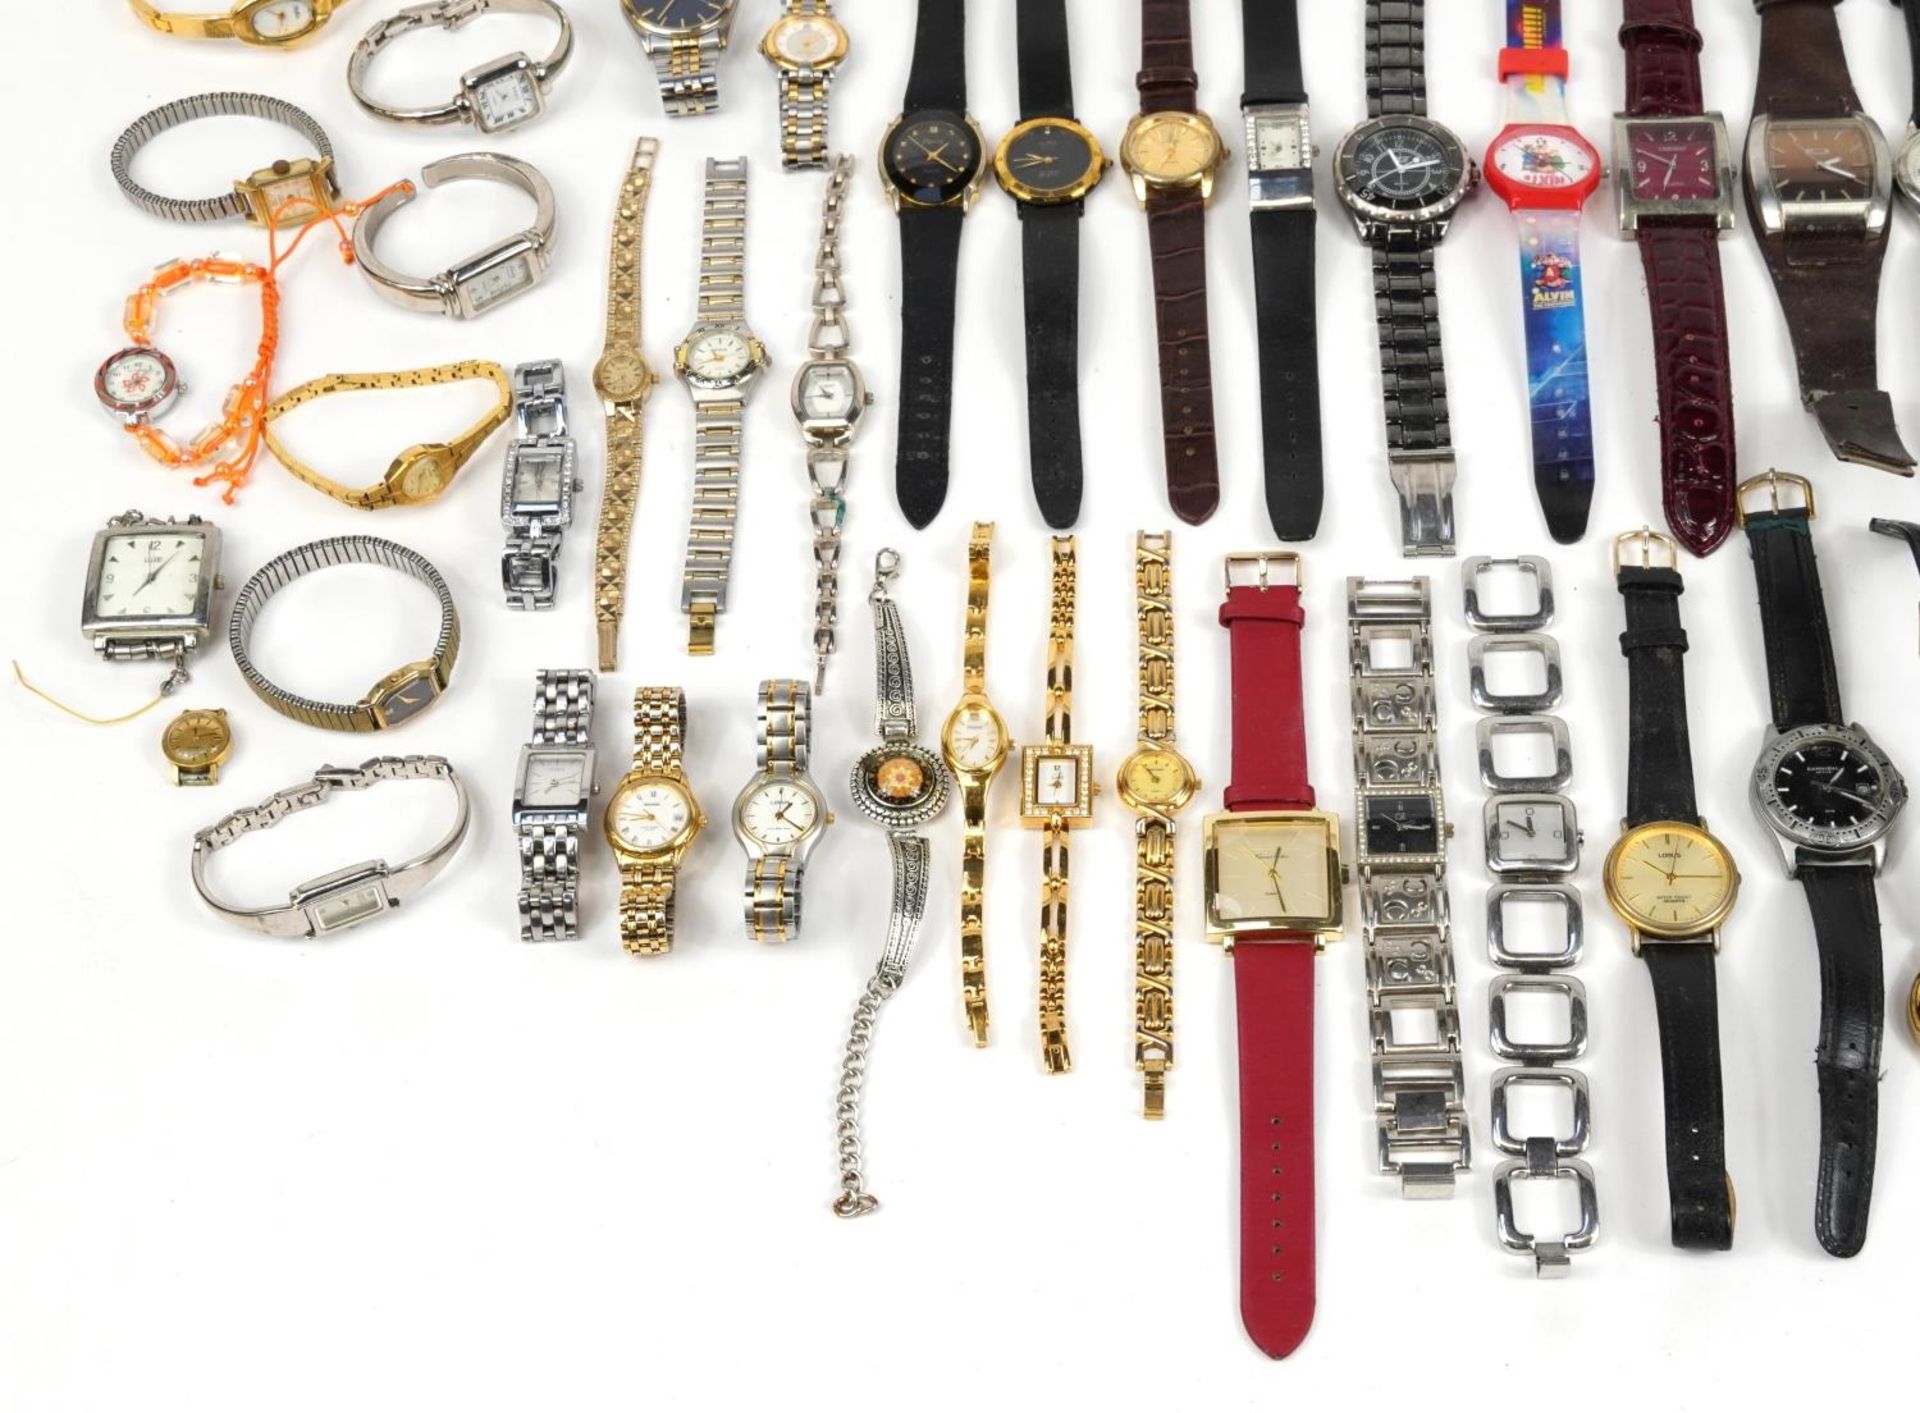 Vintage and later ladies and gentlemen's wristwatches including Sekonda, Seiko, Citizen and Oris - Image 4 of 5